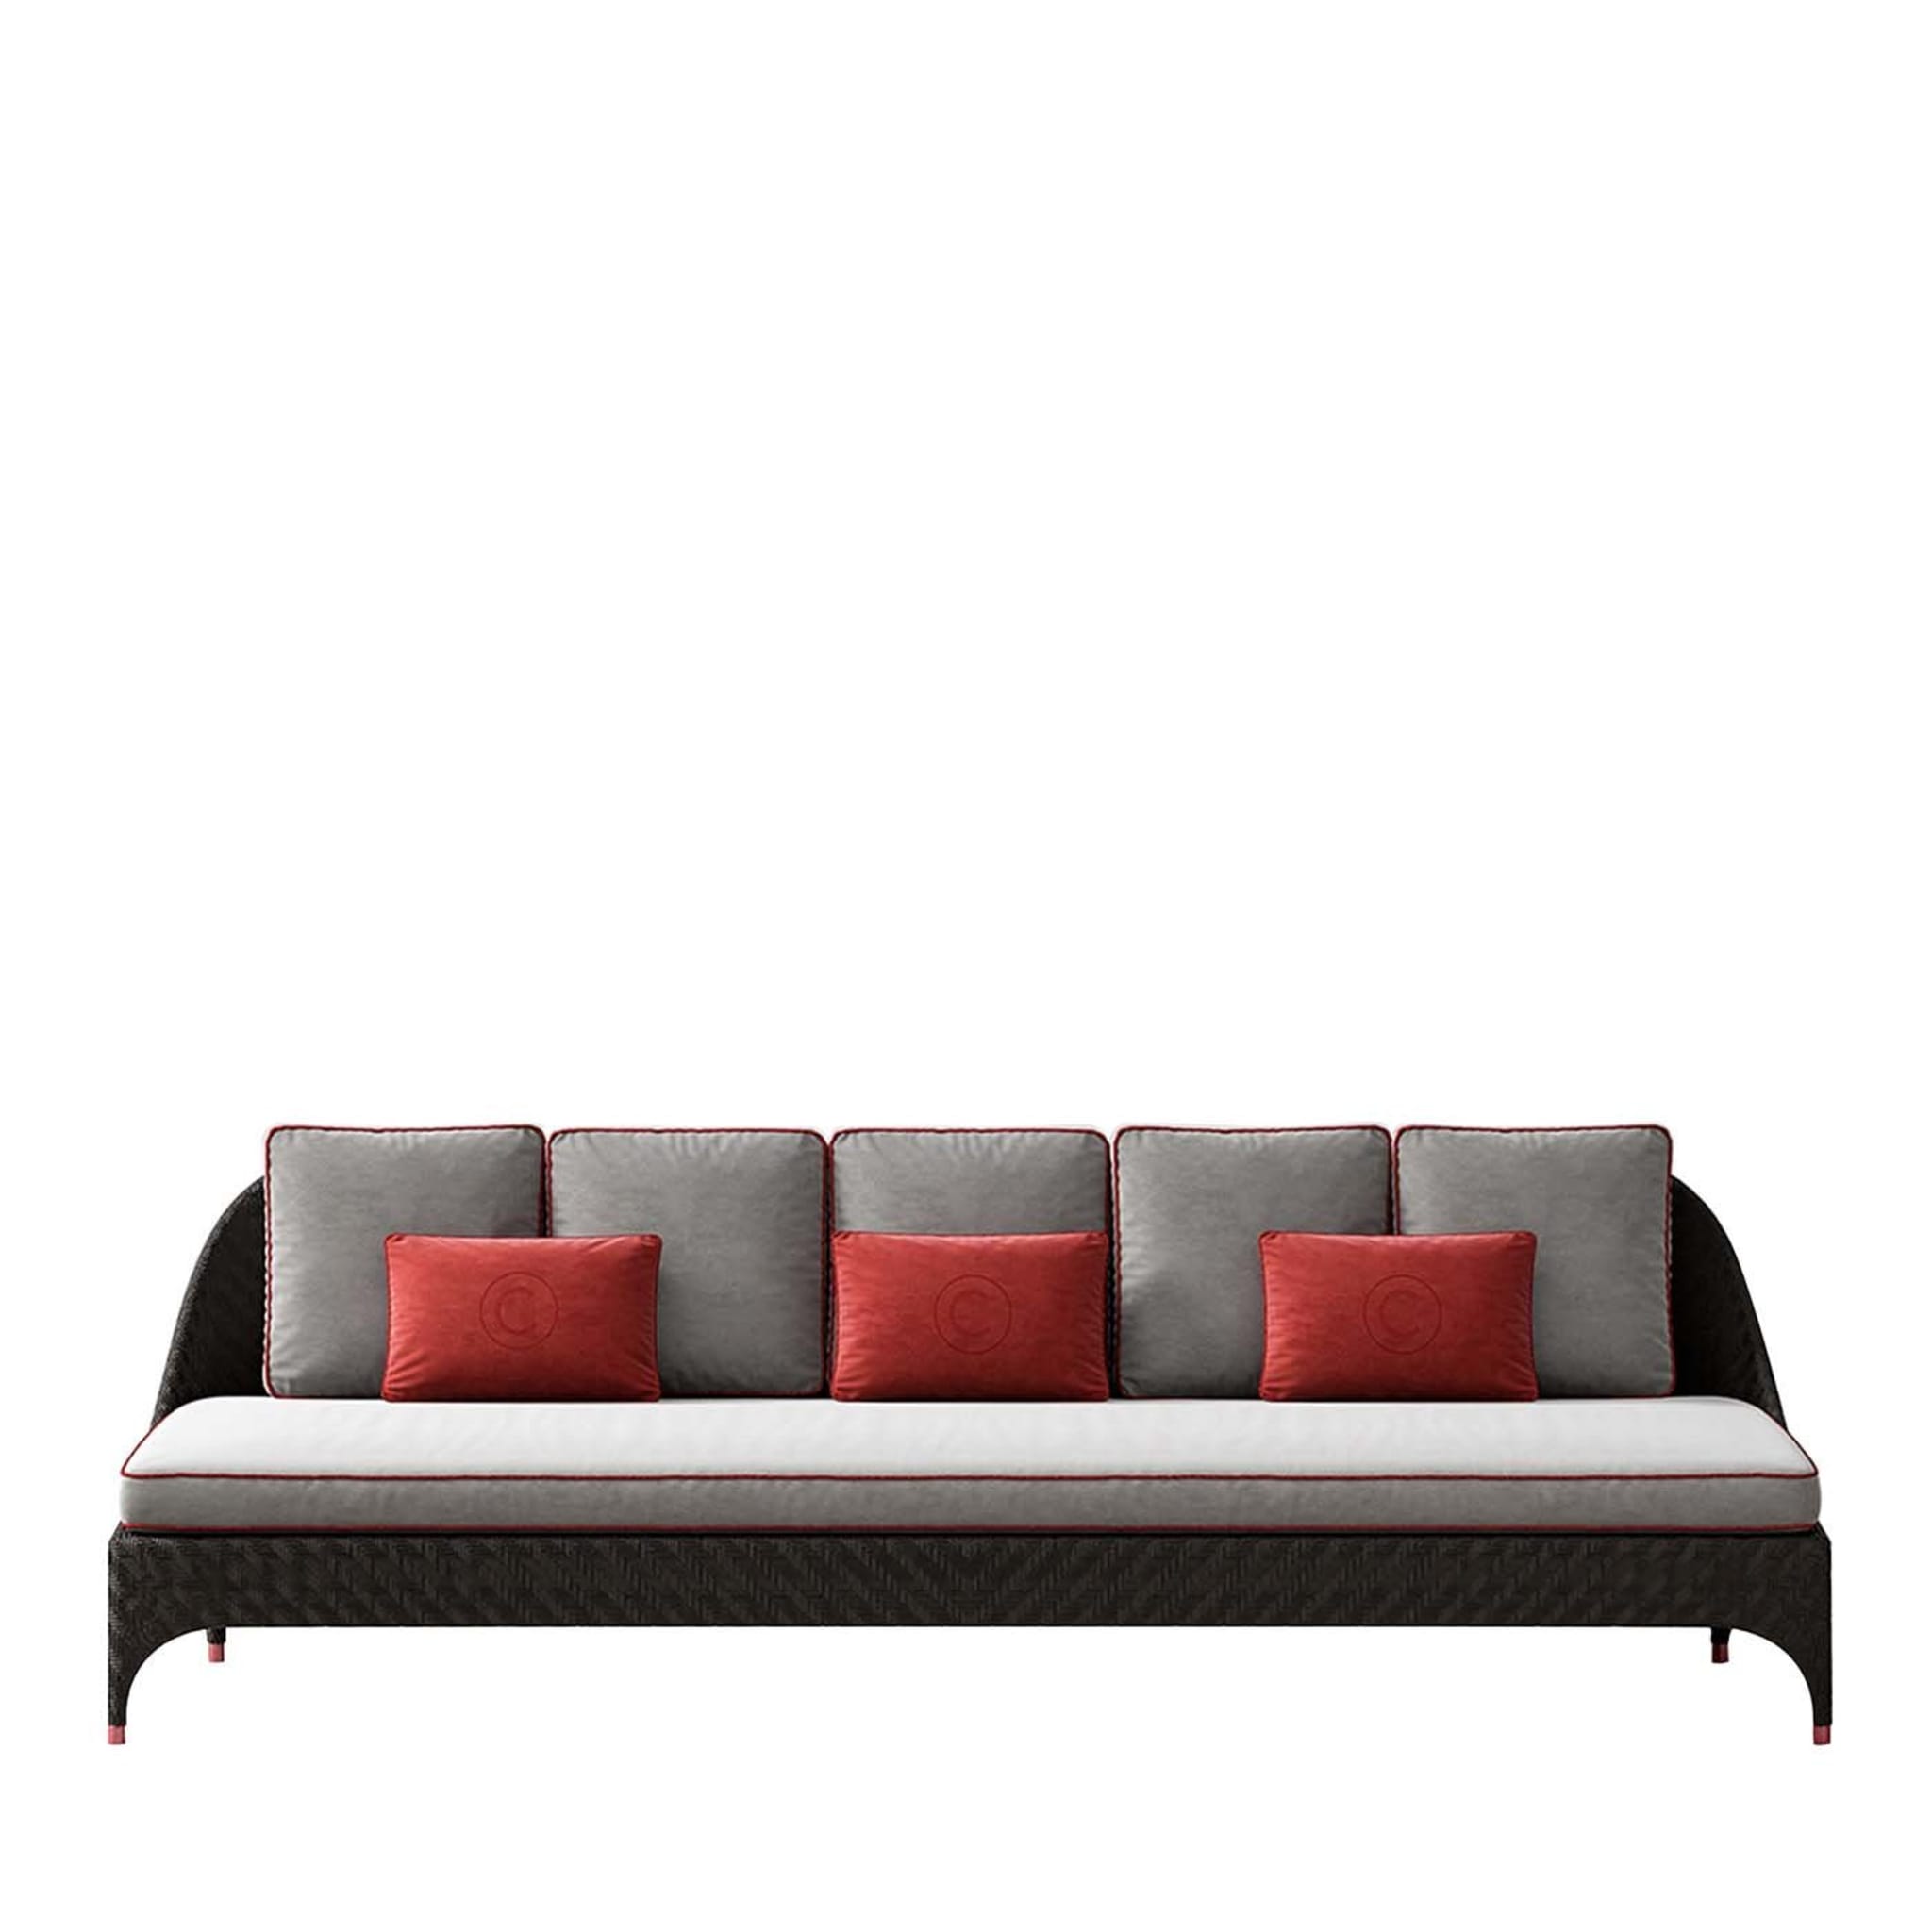 Black 3-Seater Sofa with Gray and Red Cushions - Main view